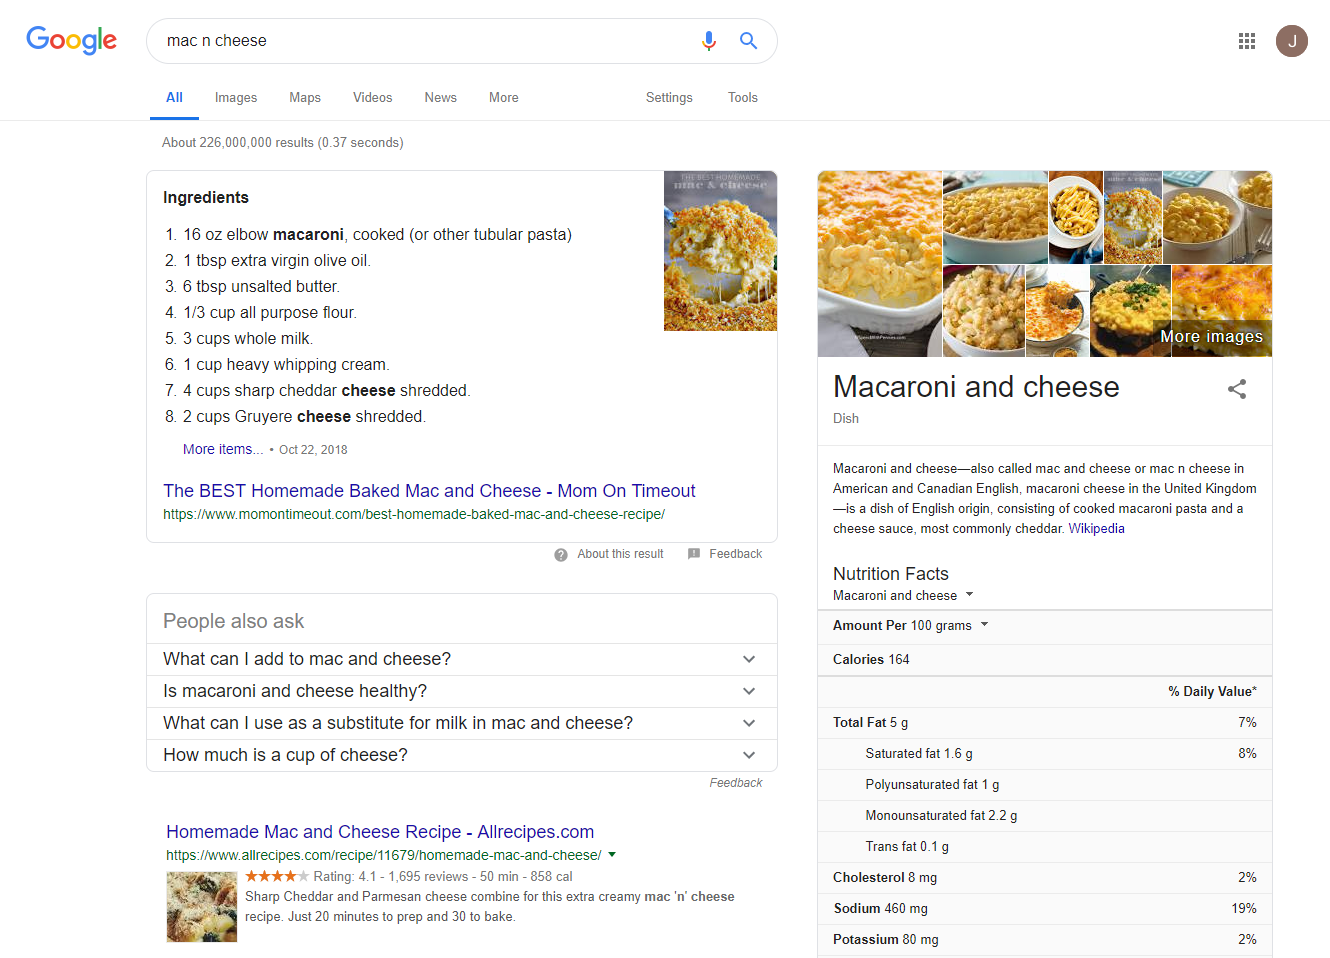 Example of rich snippets in Google SERP